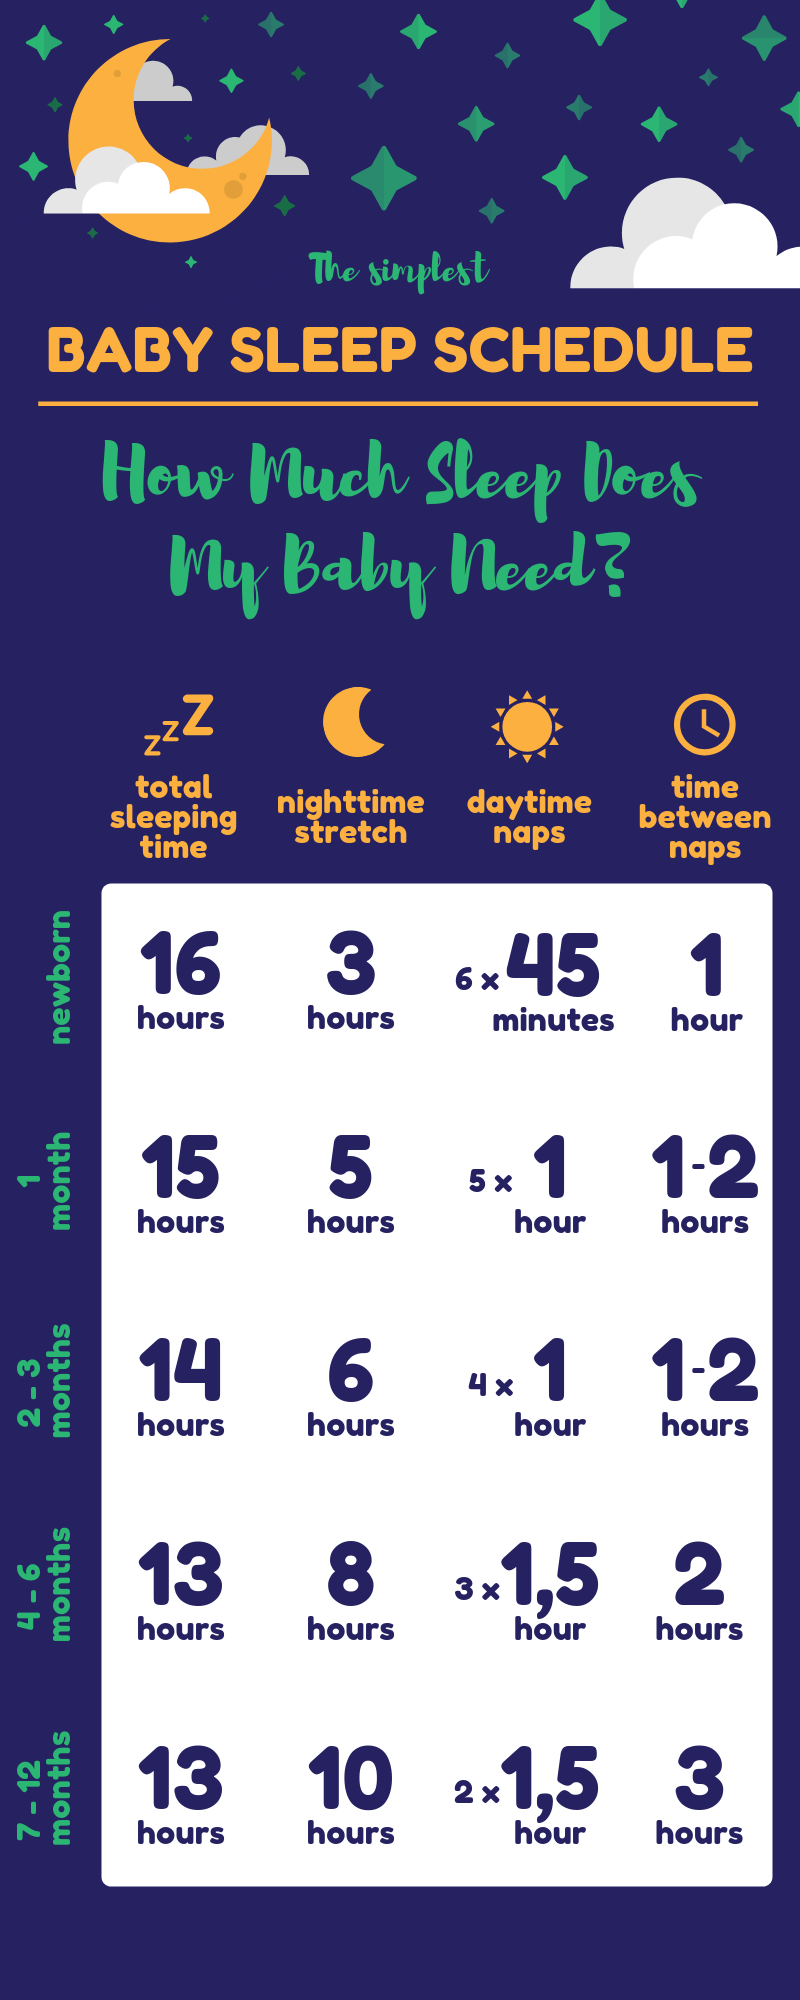 Baby Sleep Schedule: How Much Sleep Does Your Baby Need? 